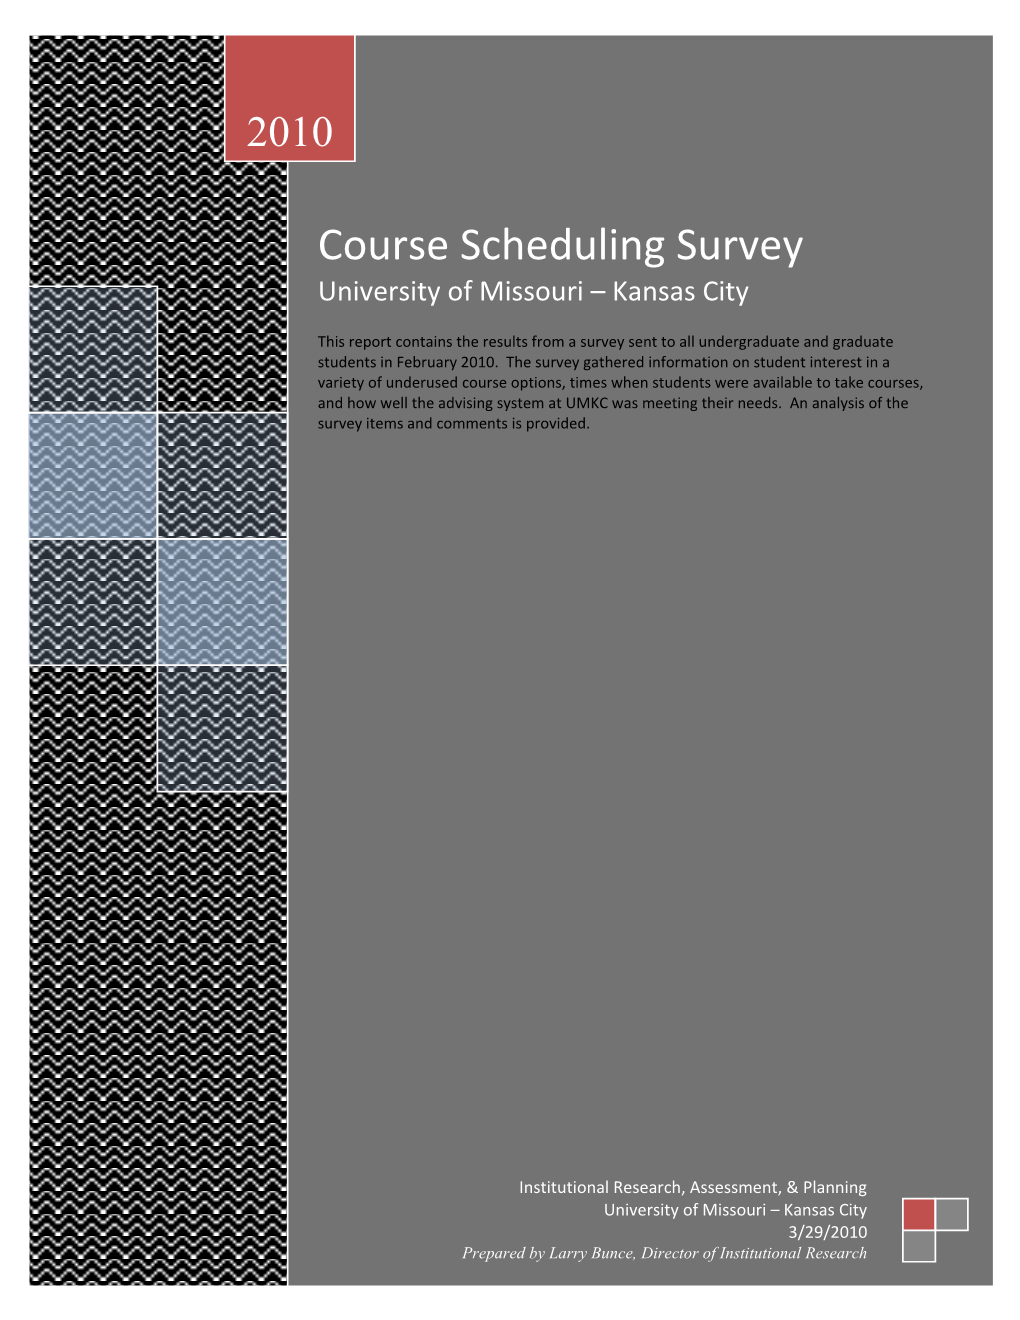 Course Scheduling Survey